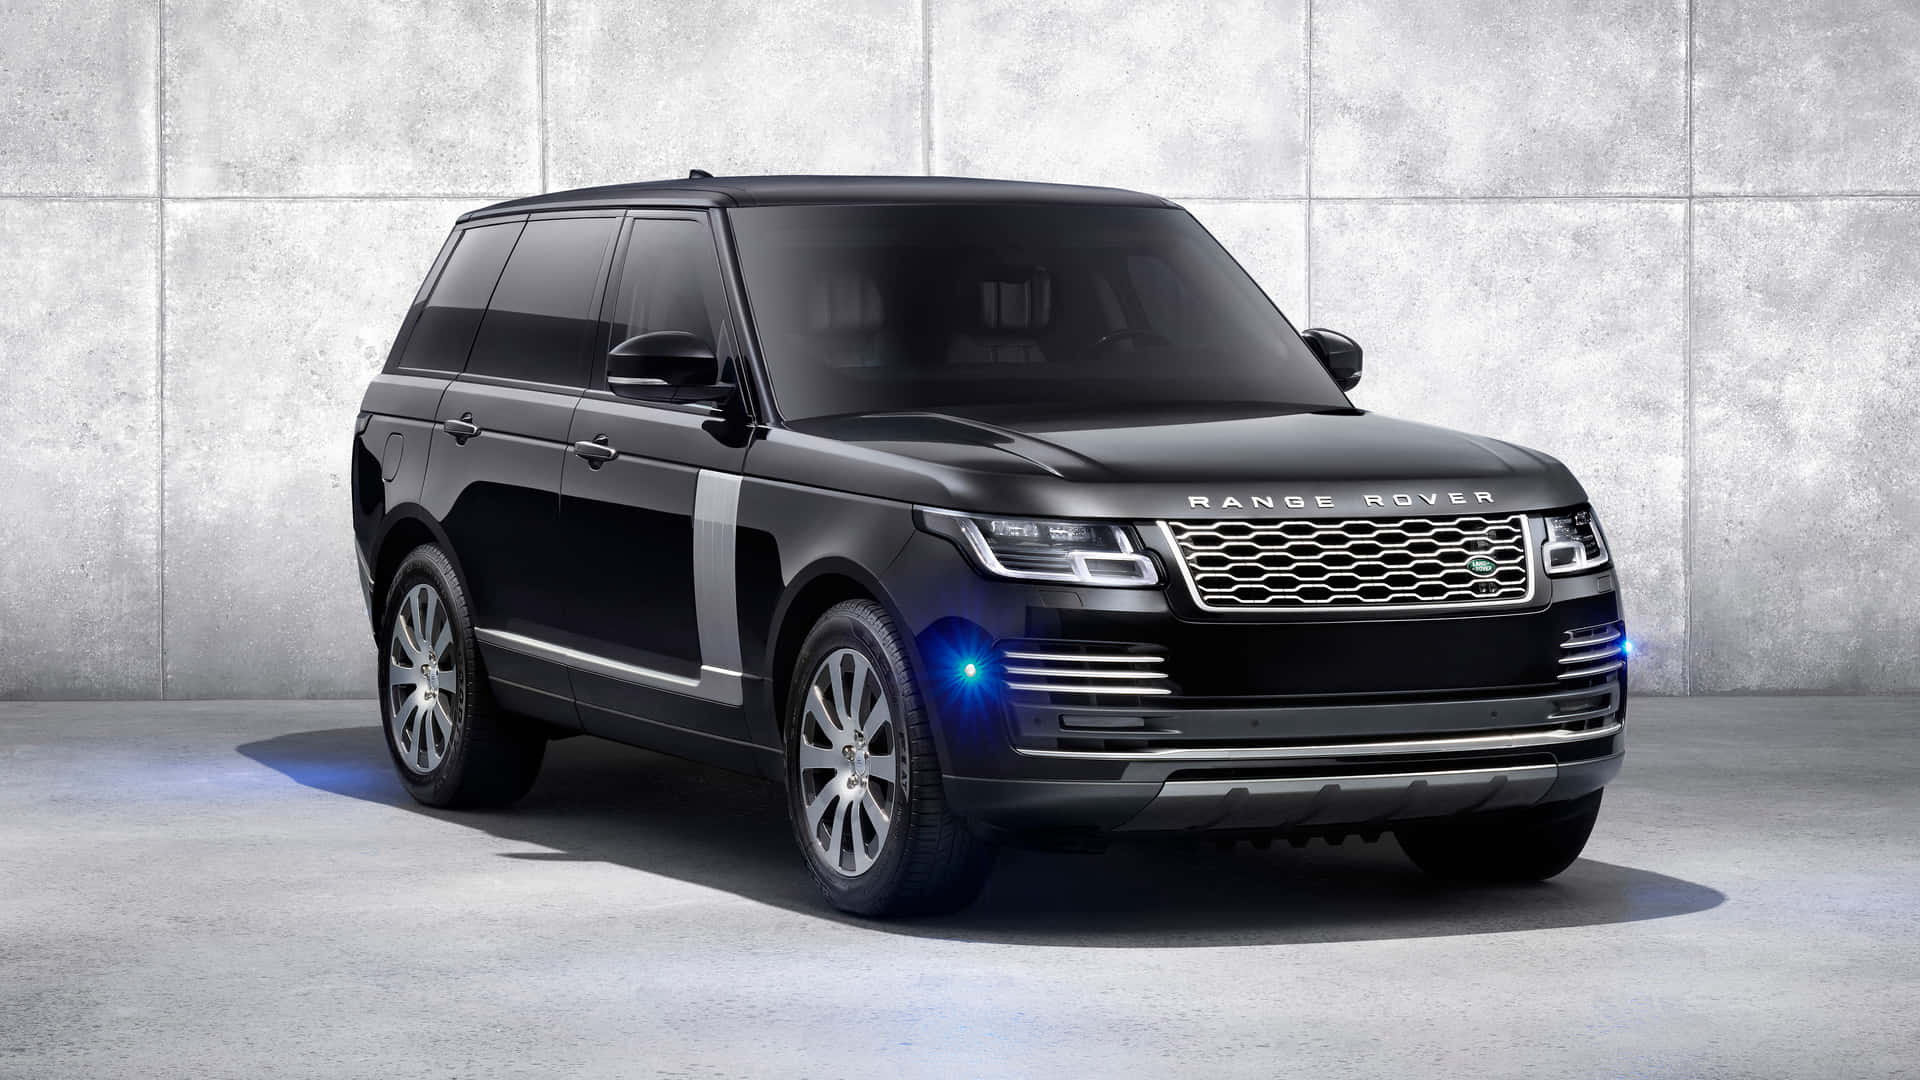 The New Range Rover Vogue Is Shown In A Black Color